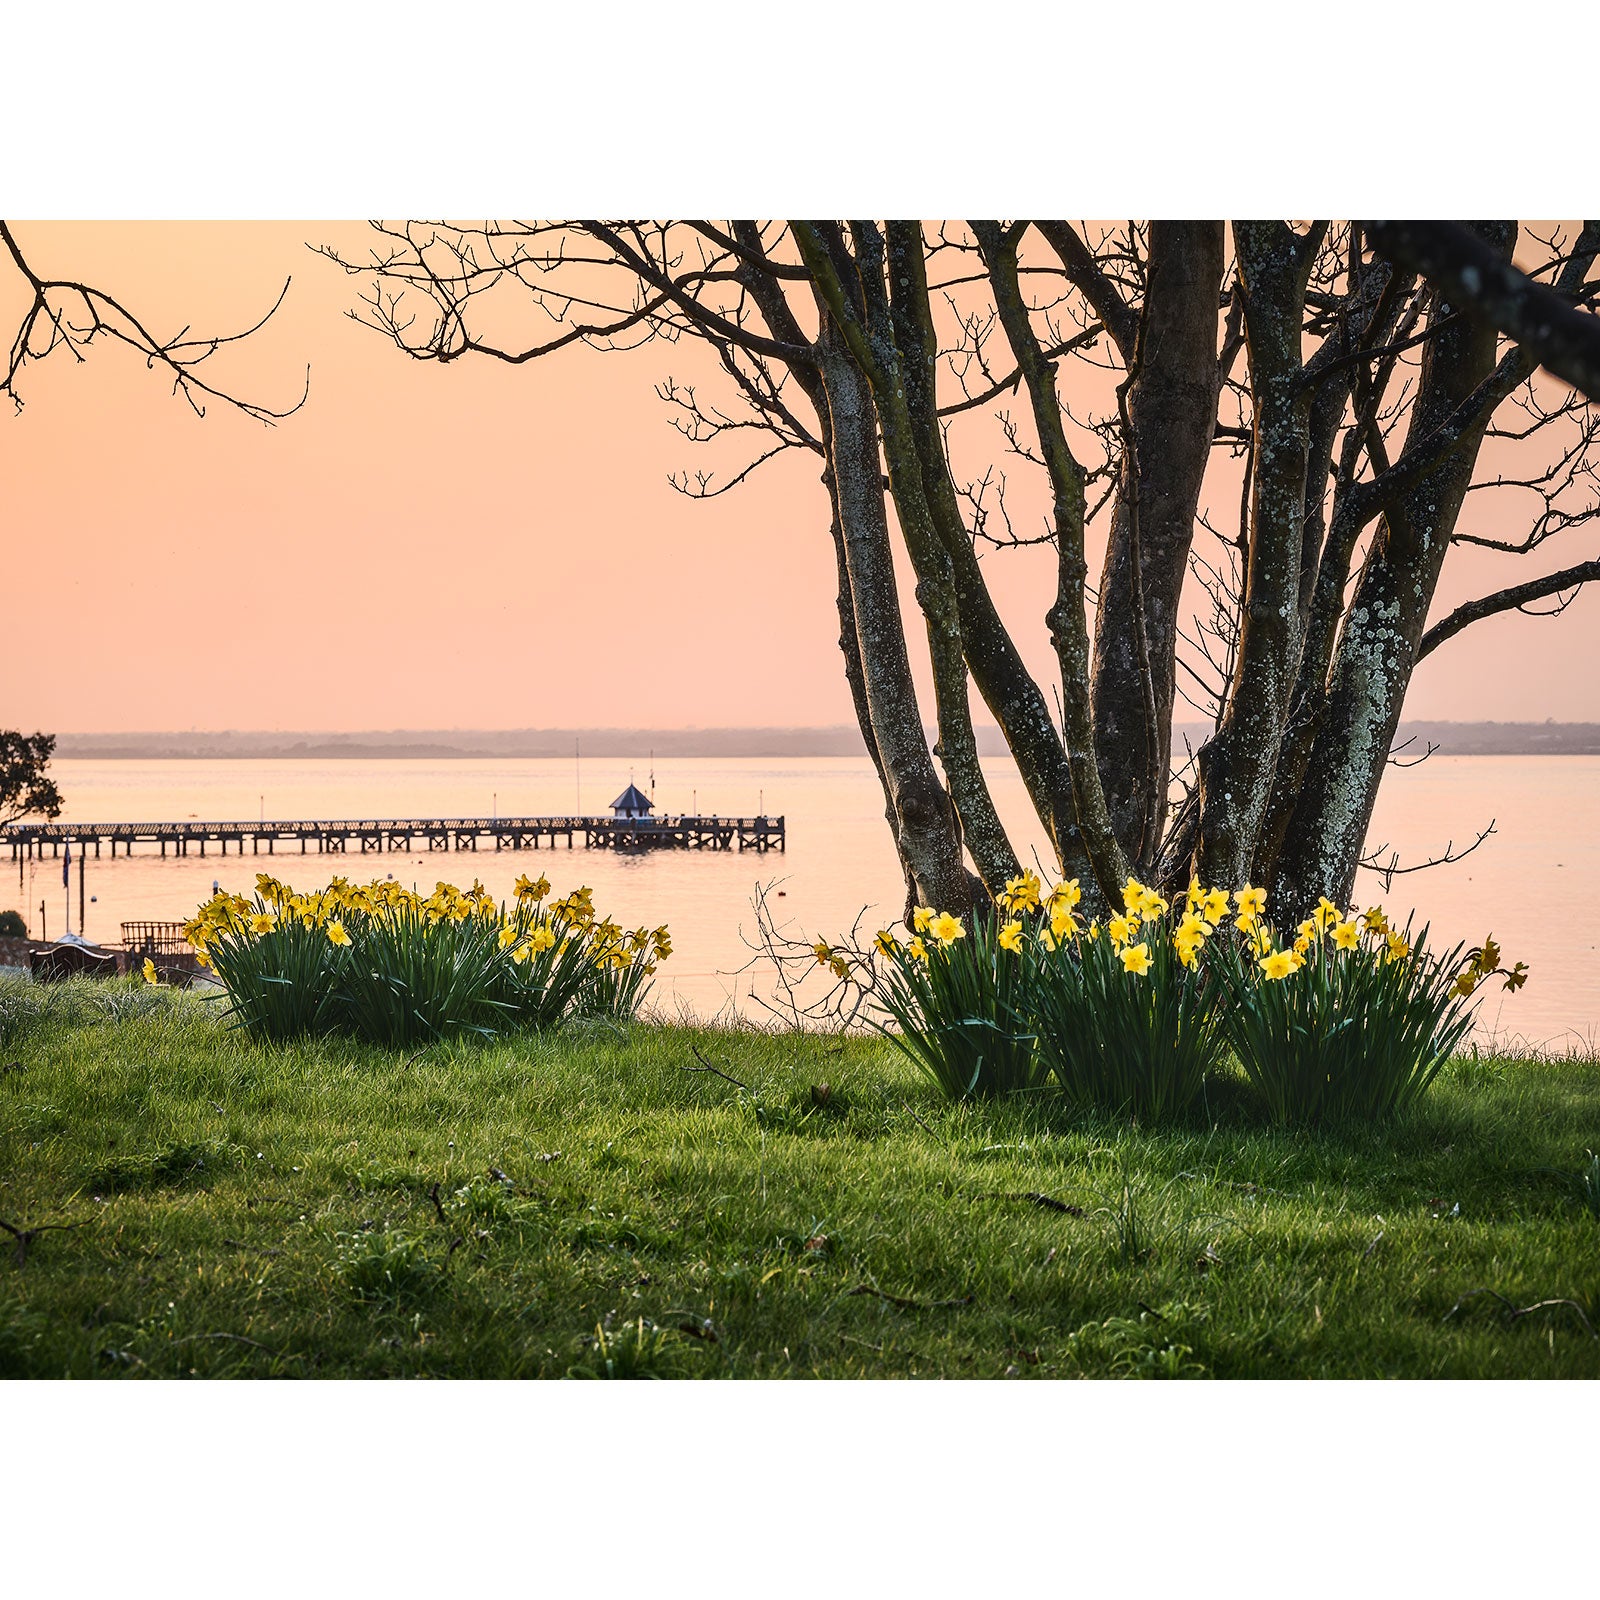 Sunset view over a lake with daffodils in the foreground and a pier in the distance on Yarmouth by Available Light Photography.